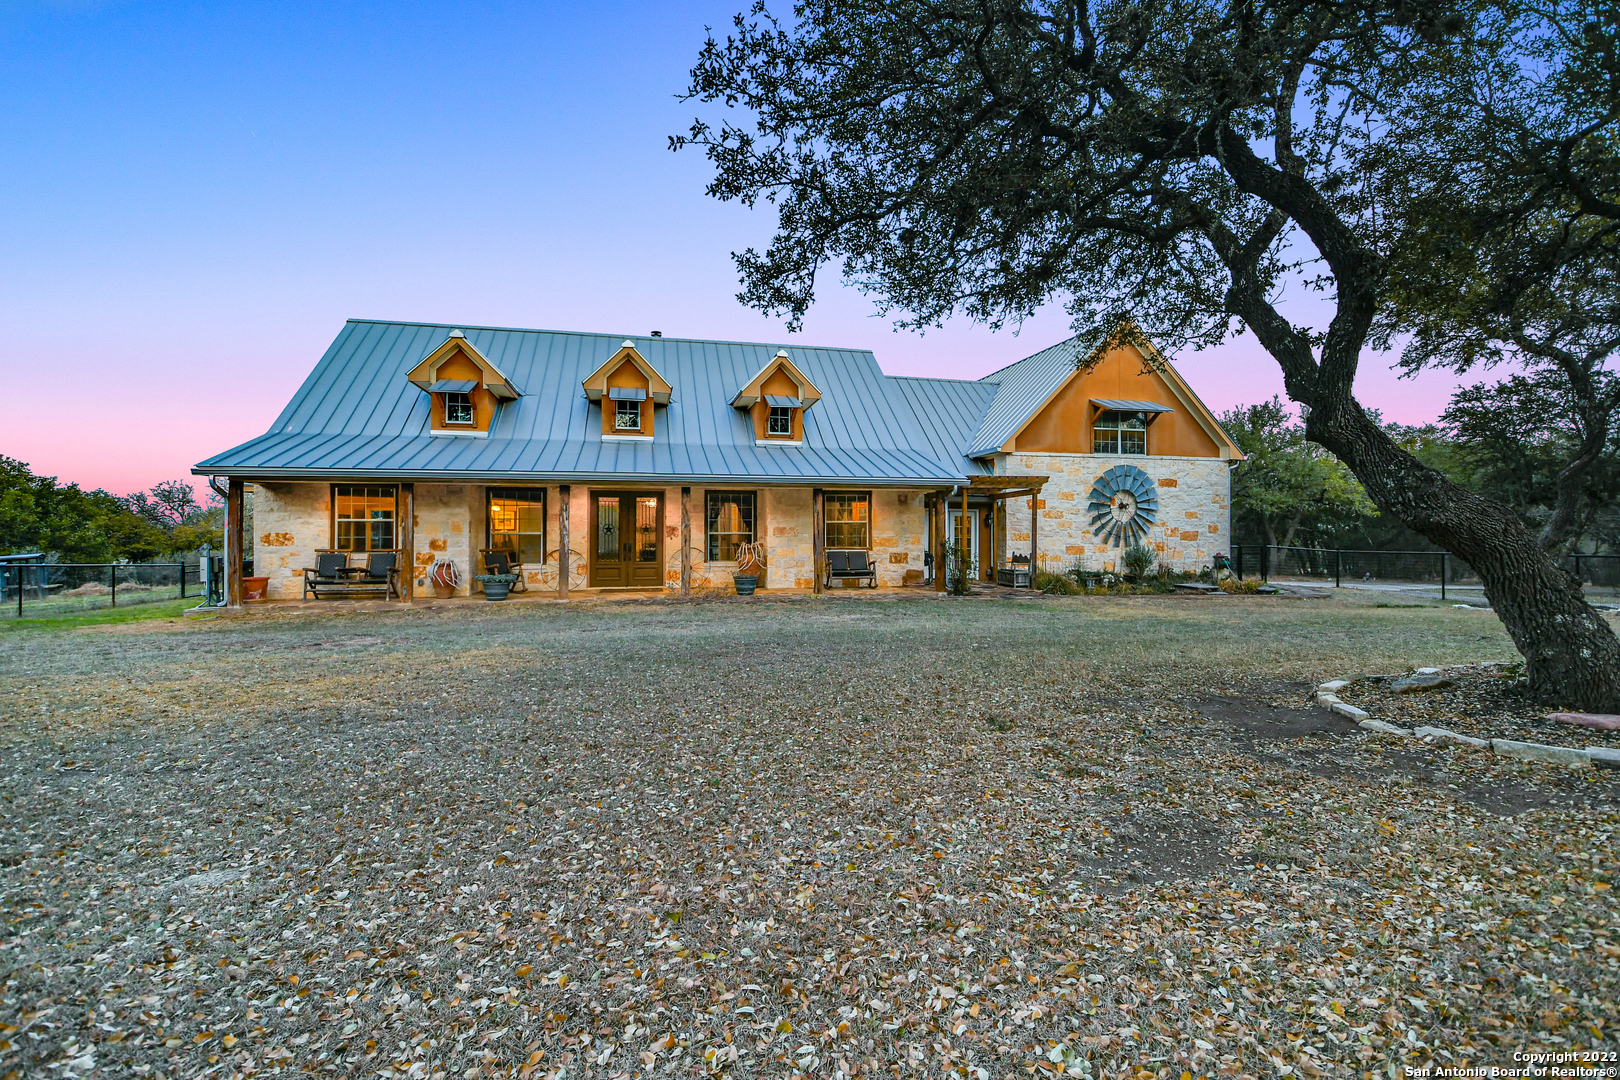 Come experience peaceful Hill Country living on this beautiful 12+/- acre wildlife tax exempt Bergenplatz Ranches property. With no HOA, this fully fenced and meticulously maintained home is located only 7 miles from downtown Boerne. Relax and entertain year round in the heated resort style Keith Zars pool, installed in 2018. This 2-story custom built open floor plan offers 3 generously sized bedrooms, 2.5 baths, office with built-ins, media room with updated built-in screen and projector, 2 car garage, spacious walk-in attic storage and koi pond. Lots of updates offer peace of mind with this property, and the wildlife tax exemption is an added bonus!